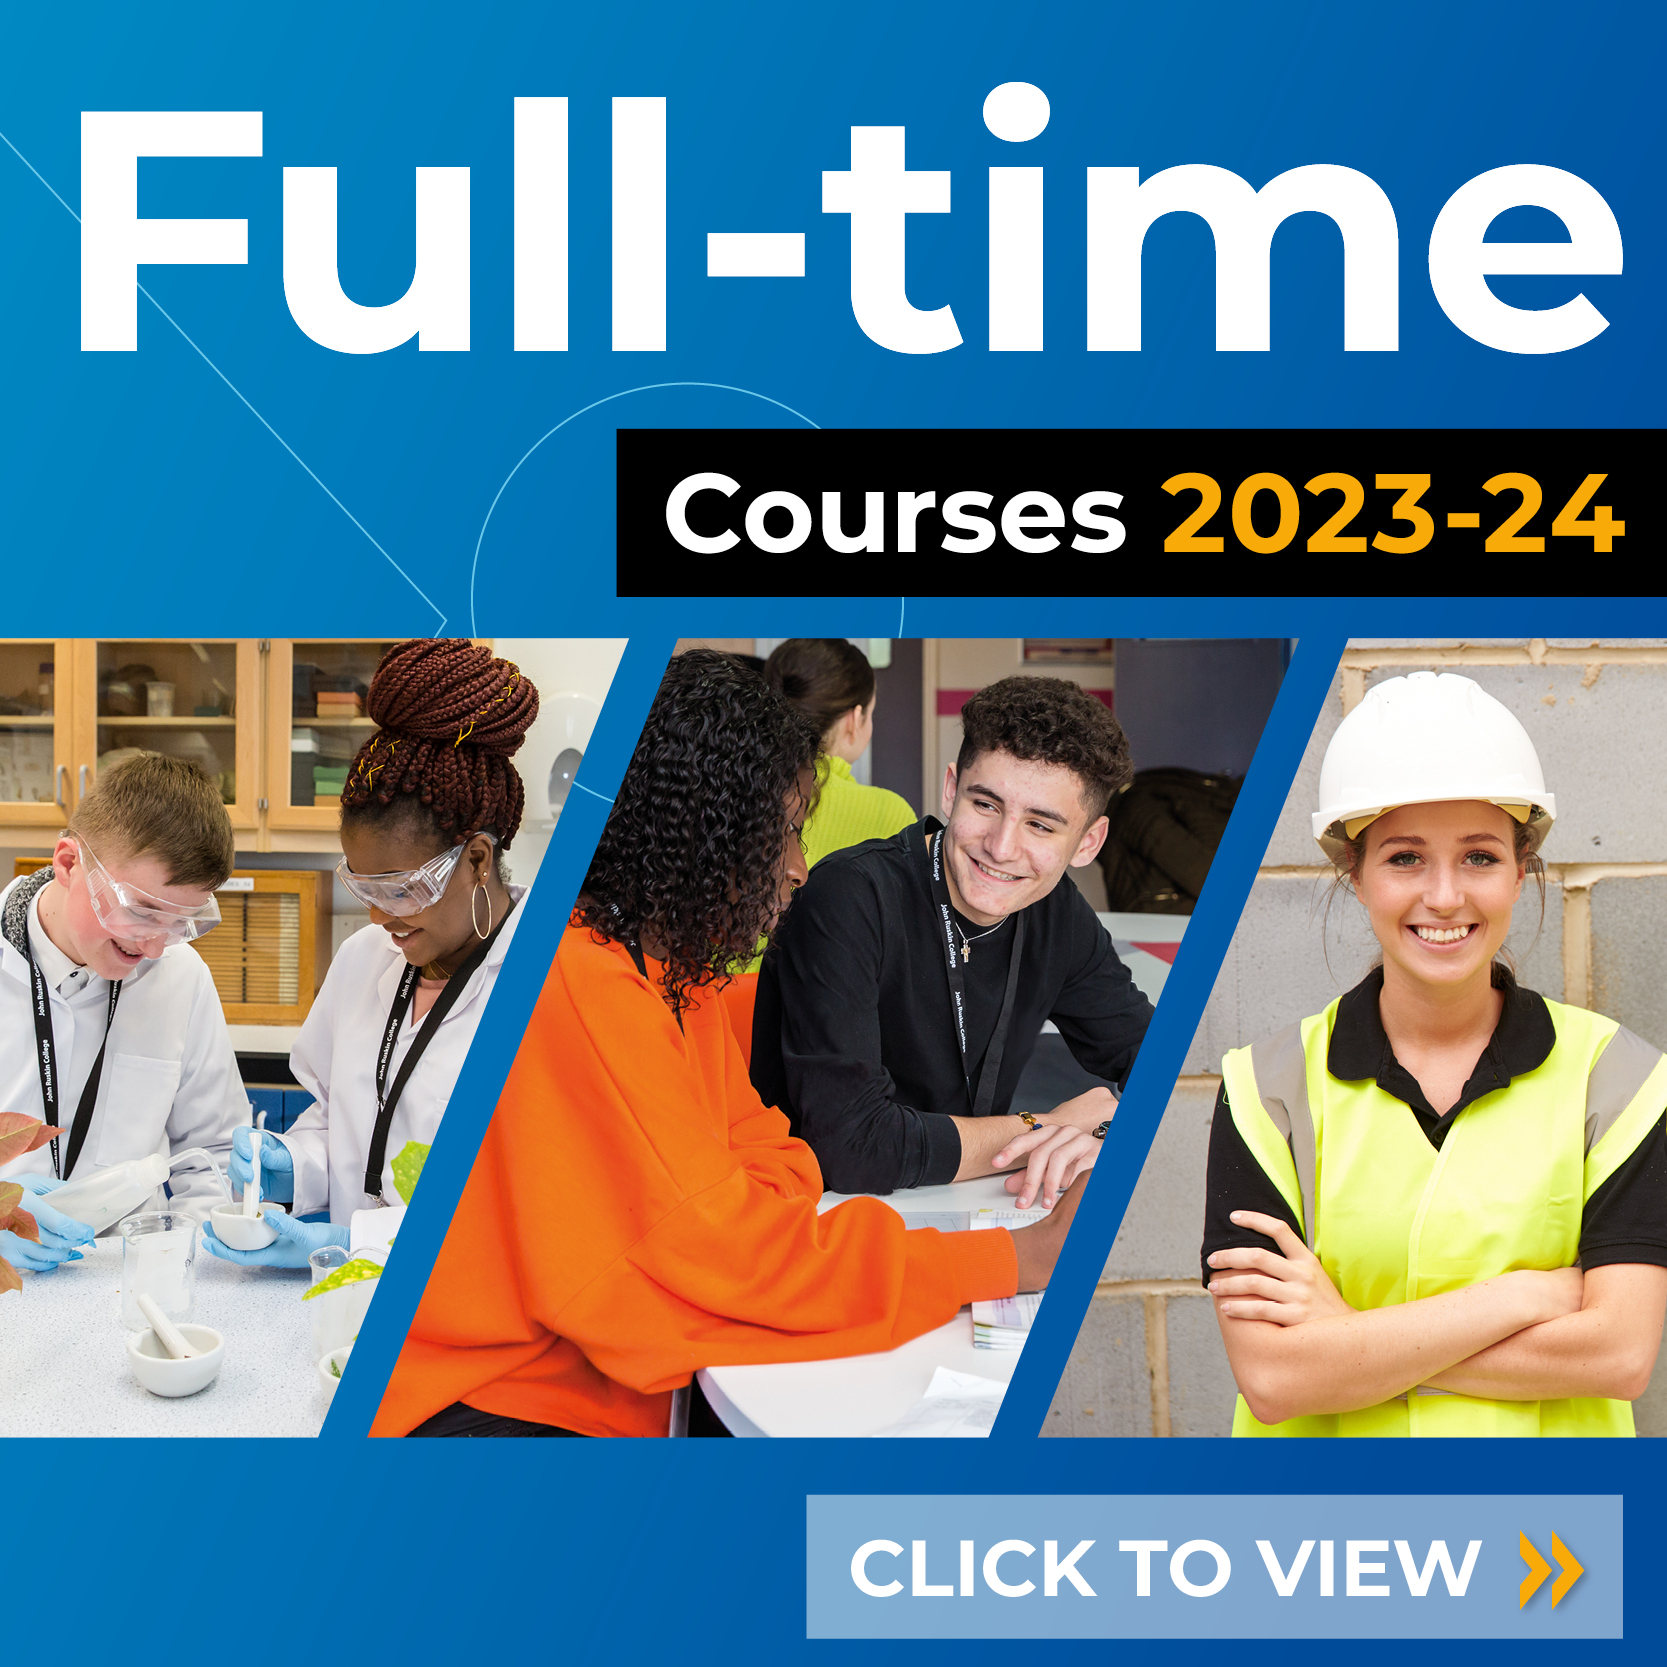 Full-time courses - click to view